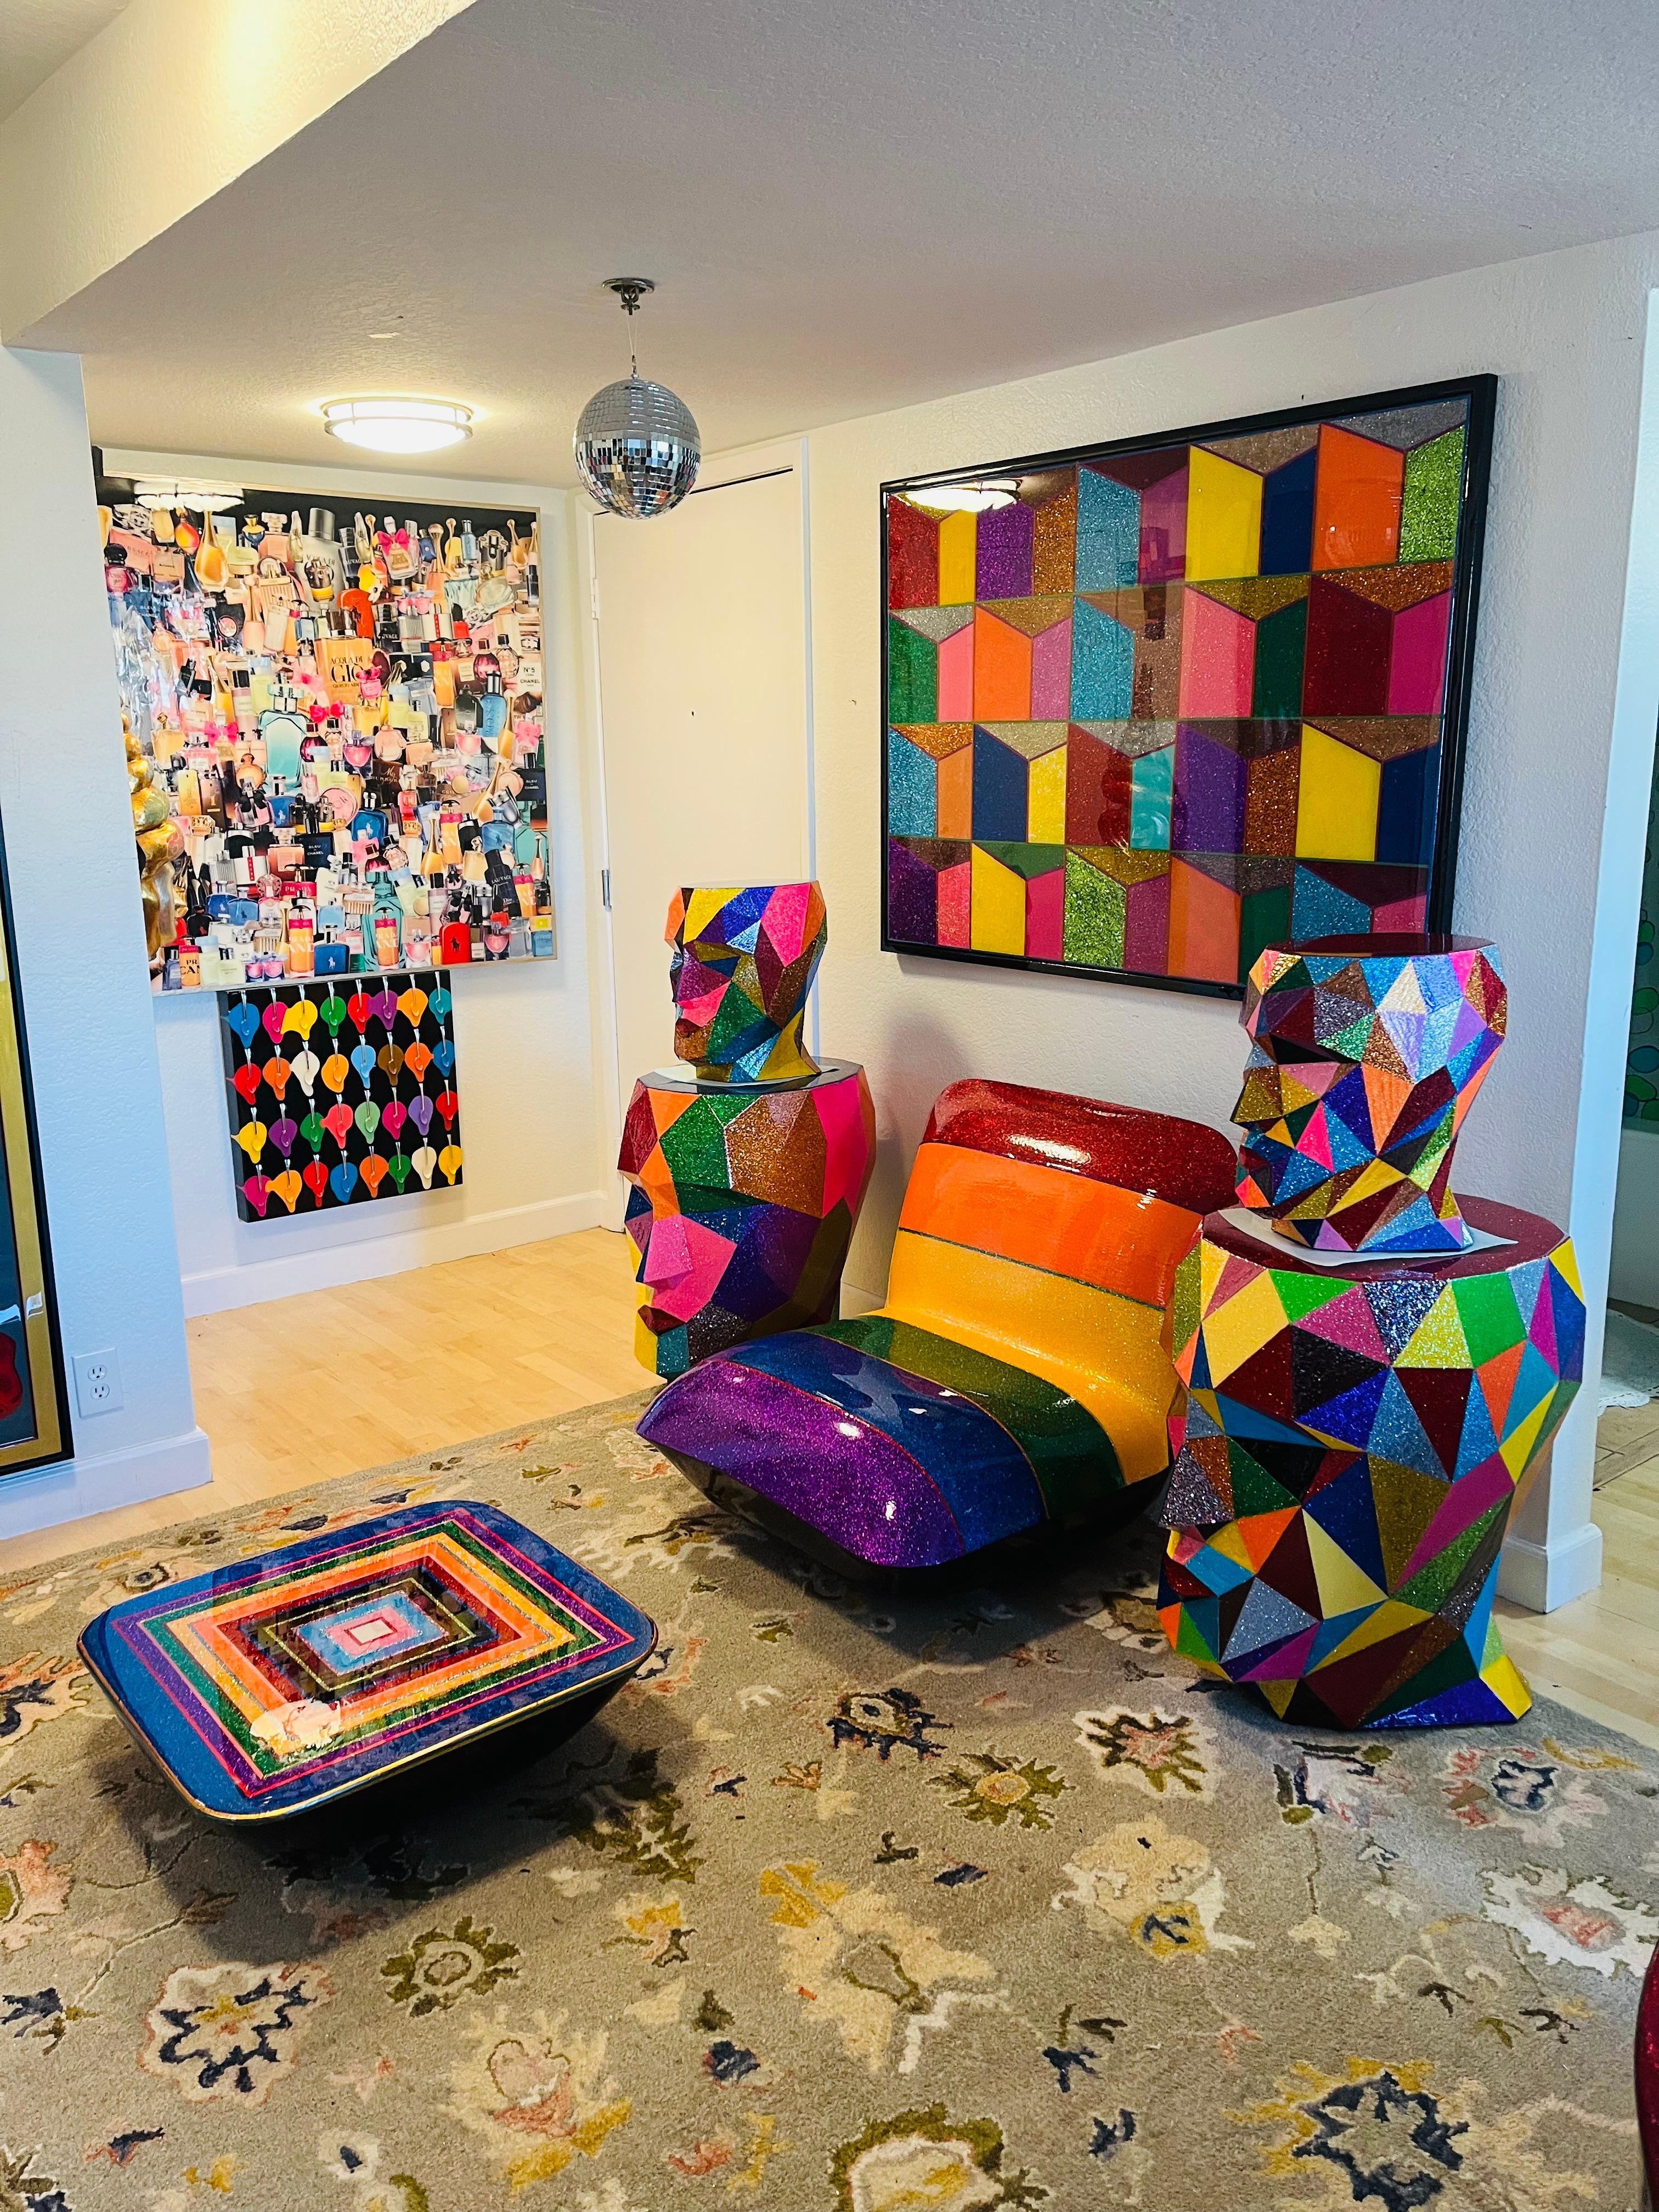 WORLD'S HAPPIEST ROOM (7 Original Pieces - ALL One Of A Kind Art Installation) 7